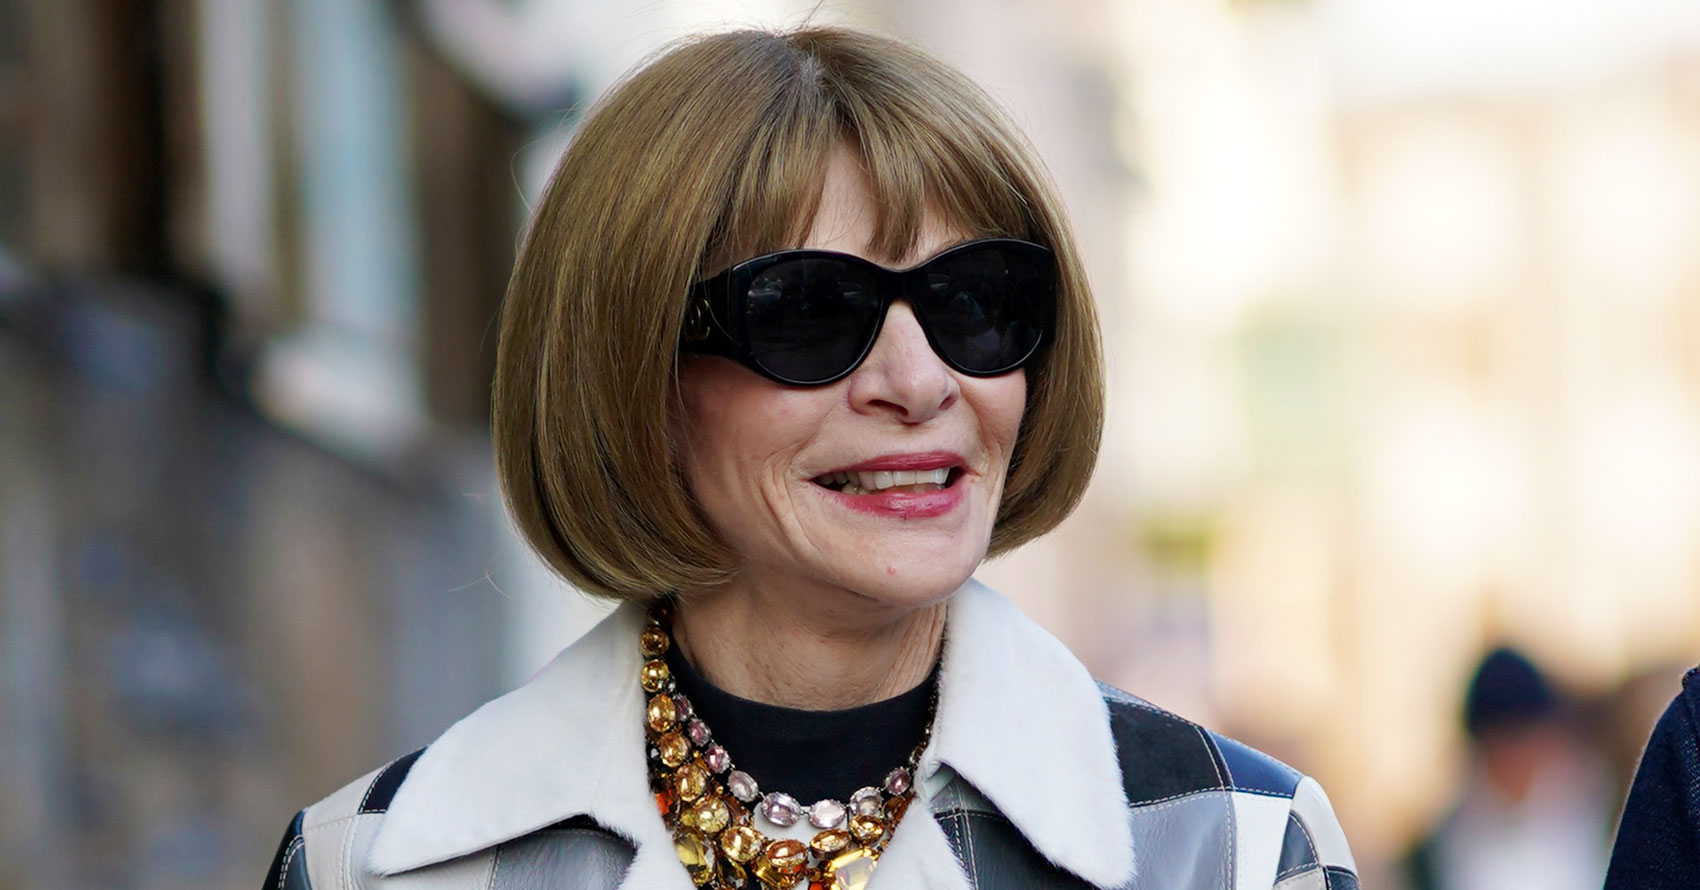 Anna Wintour Packed This Affordable Trend in Multiple Colors for Paris Couture